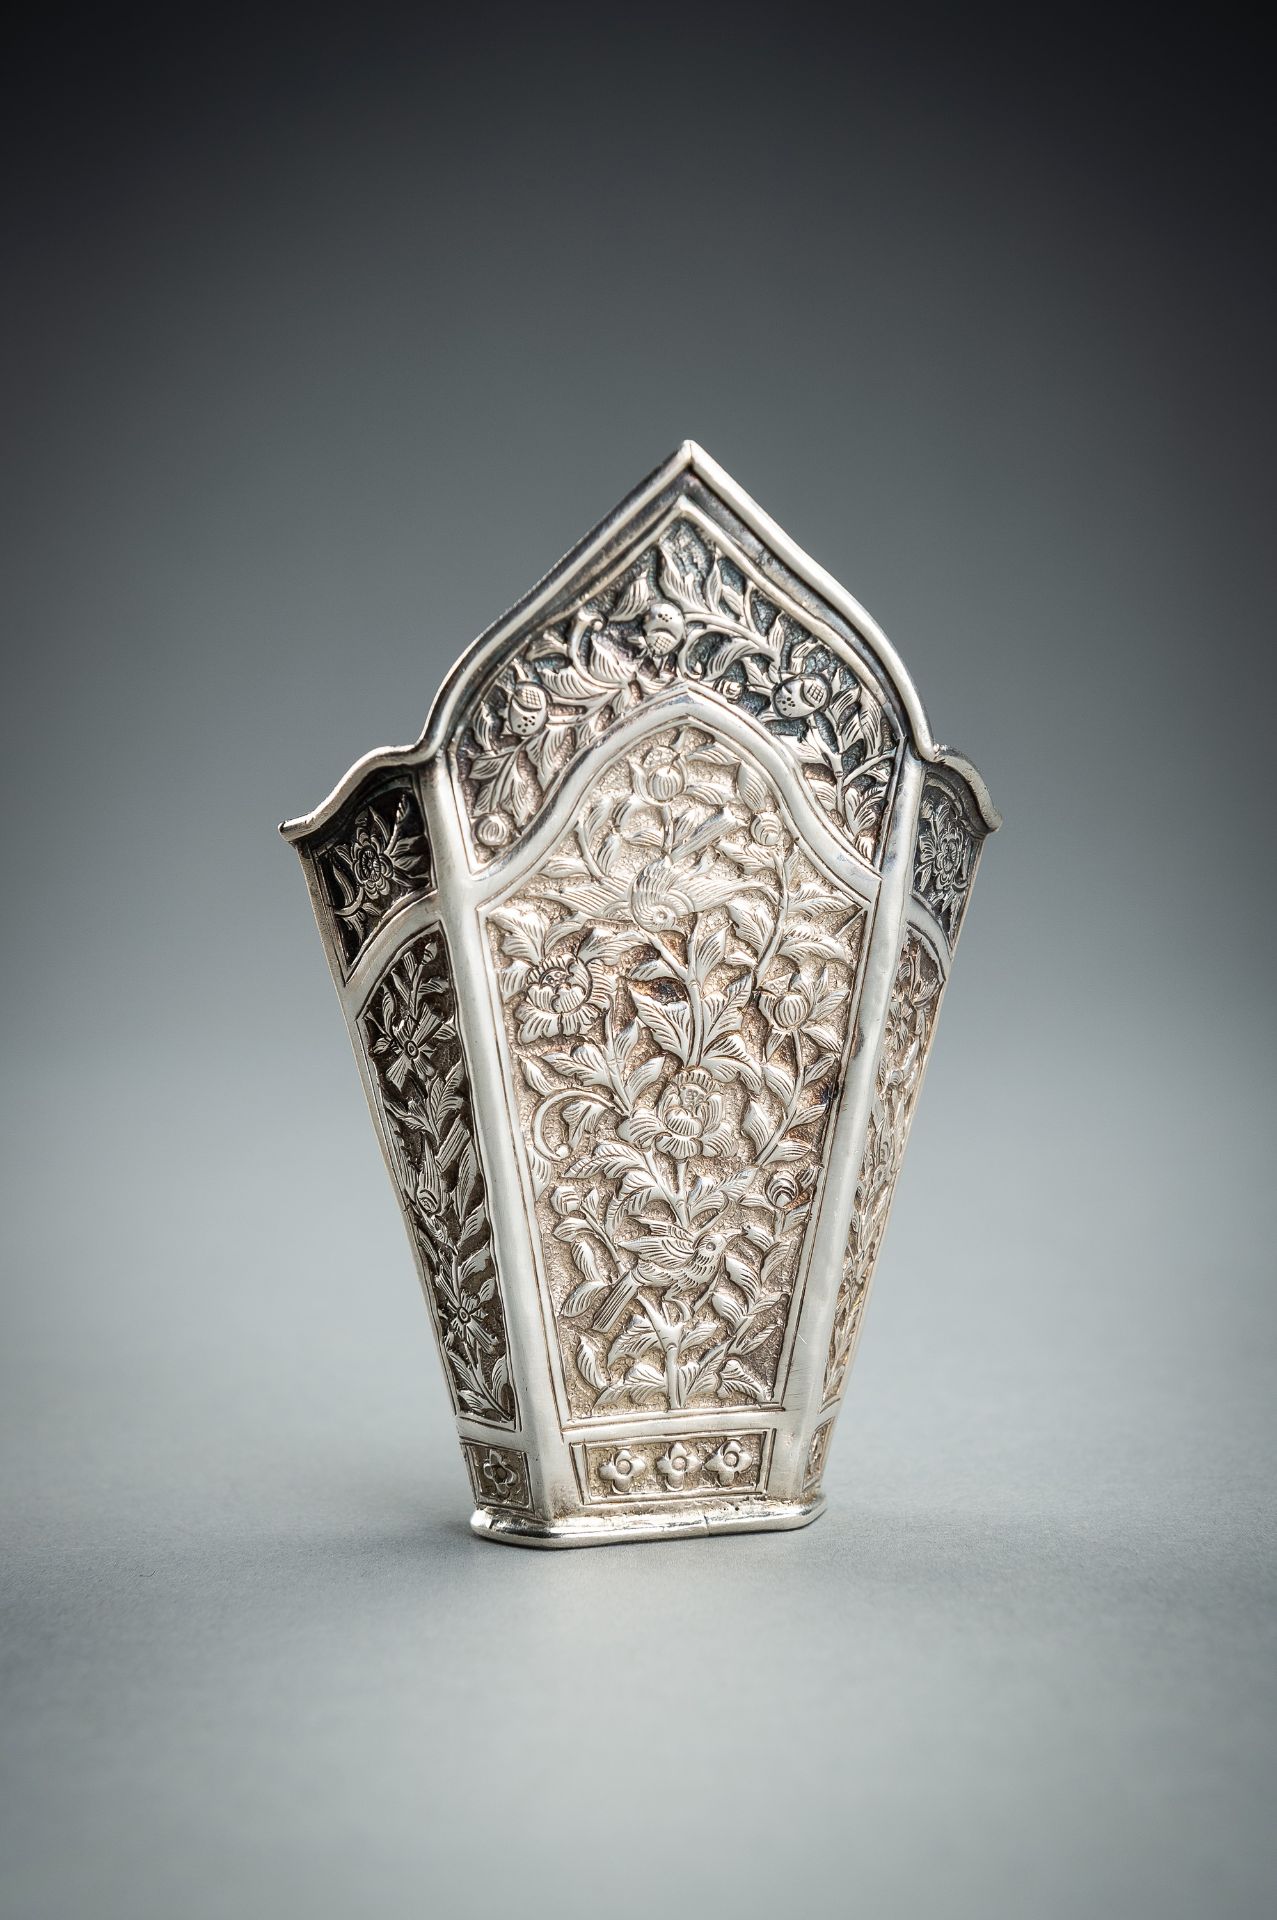 A GROUP OF FIVE EMBOSSED SILVER BETEL LEAF HOLDERS, c. 1900s - Image 17 of 19